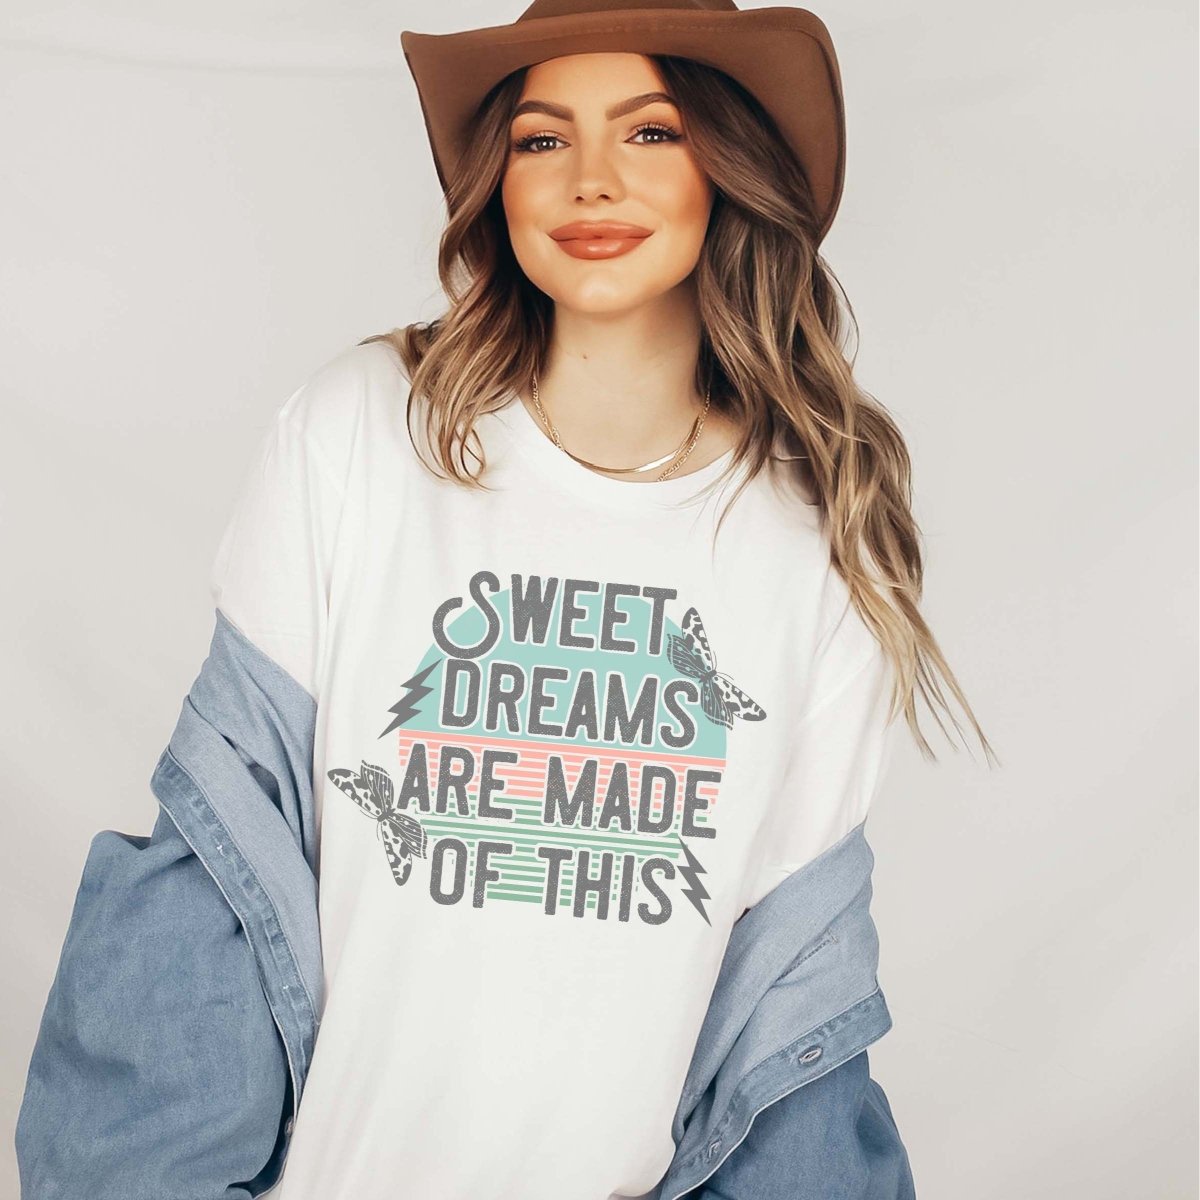 Sweet Dreams Made of this Wholesale Tee - Limeberry Designs